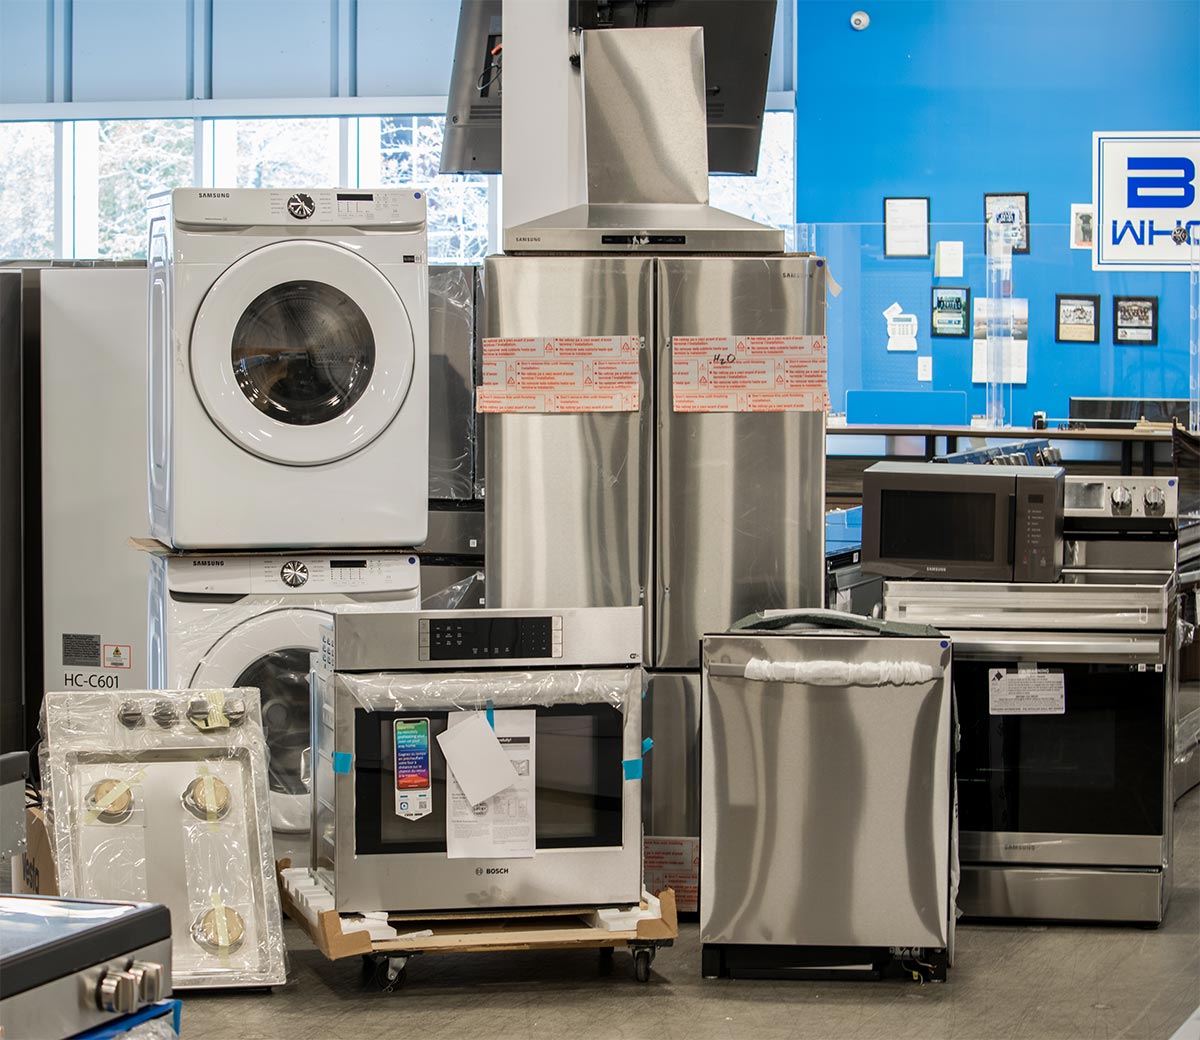 Major brand name appliances & electronics for less in Surrey, Langley and Vancouver area